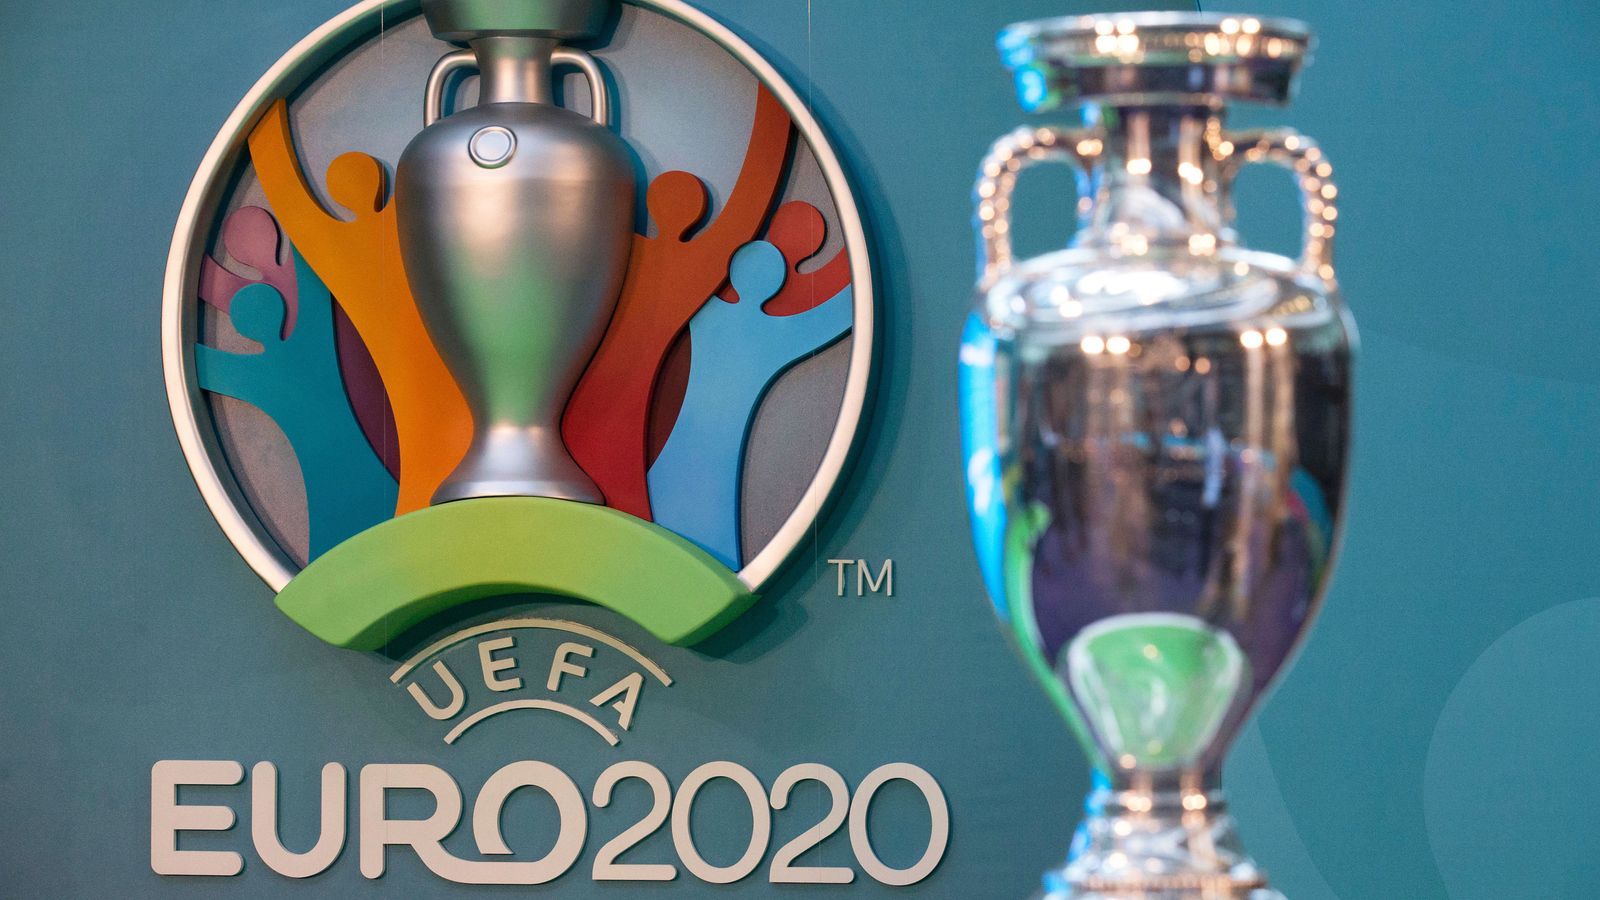 sky-sports-make-scotland-and-northern-ireland-euro-2020-playoff-finals-available-freetoair